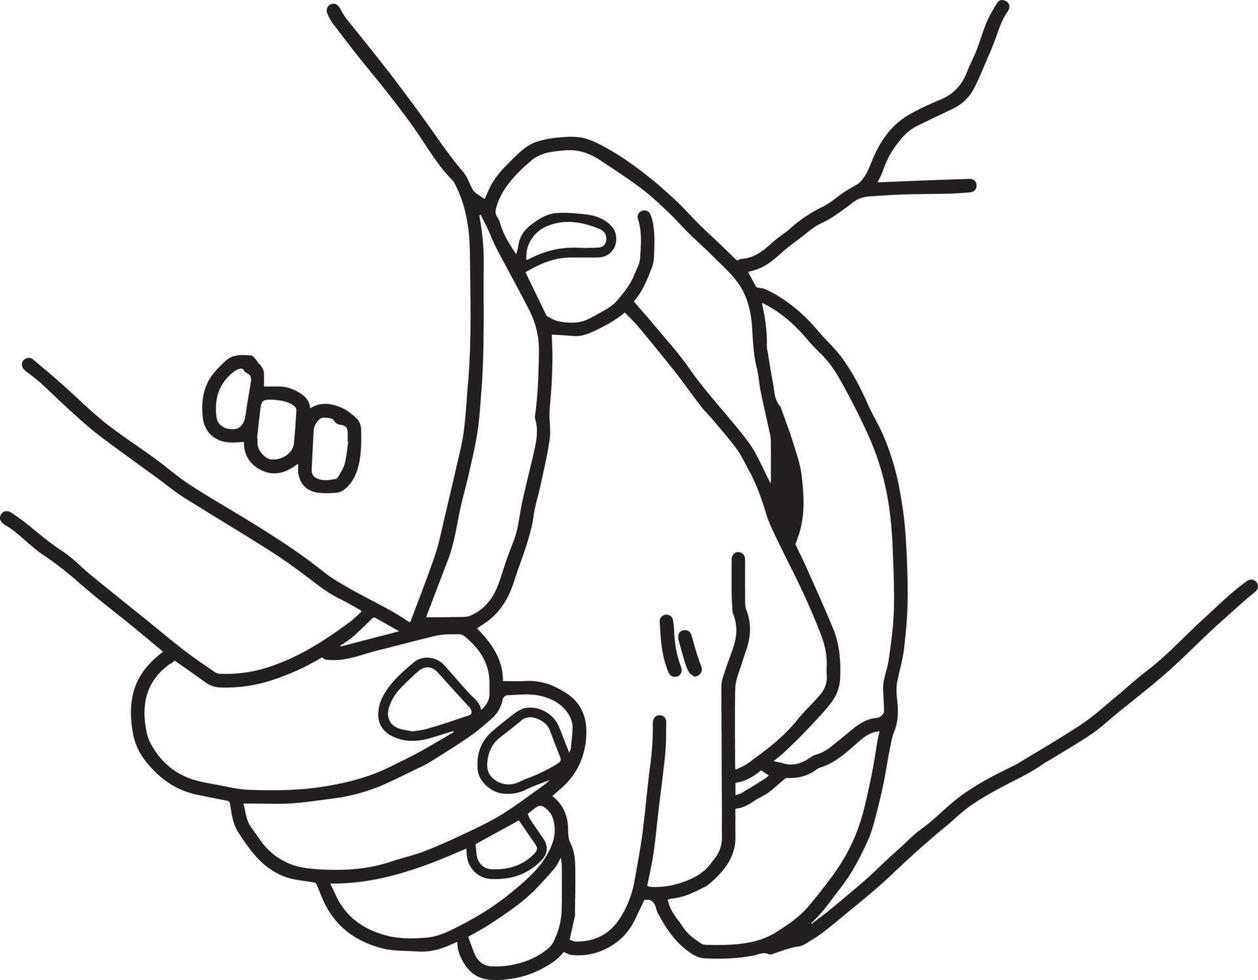 close up two businesspeople shaking hands - vector